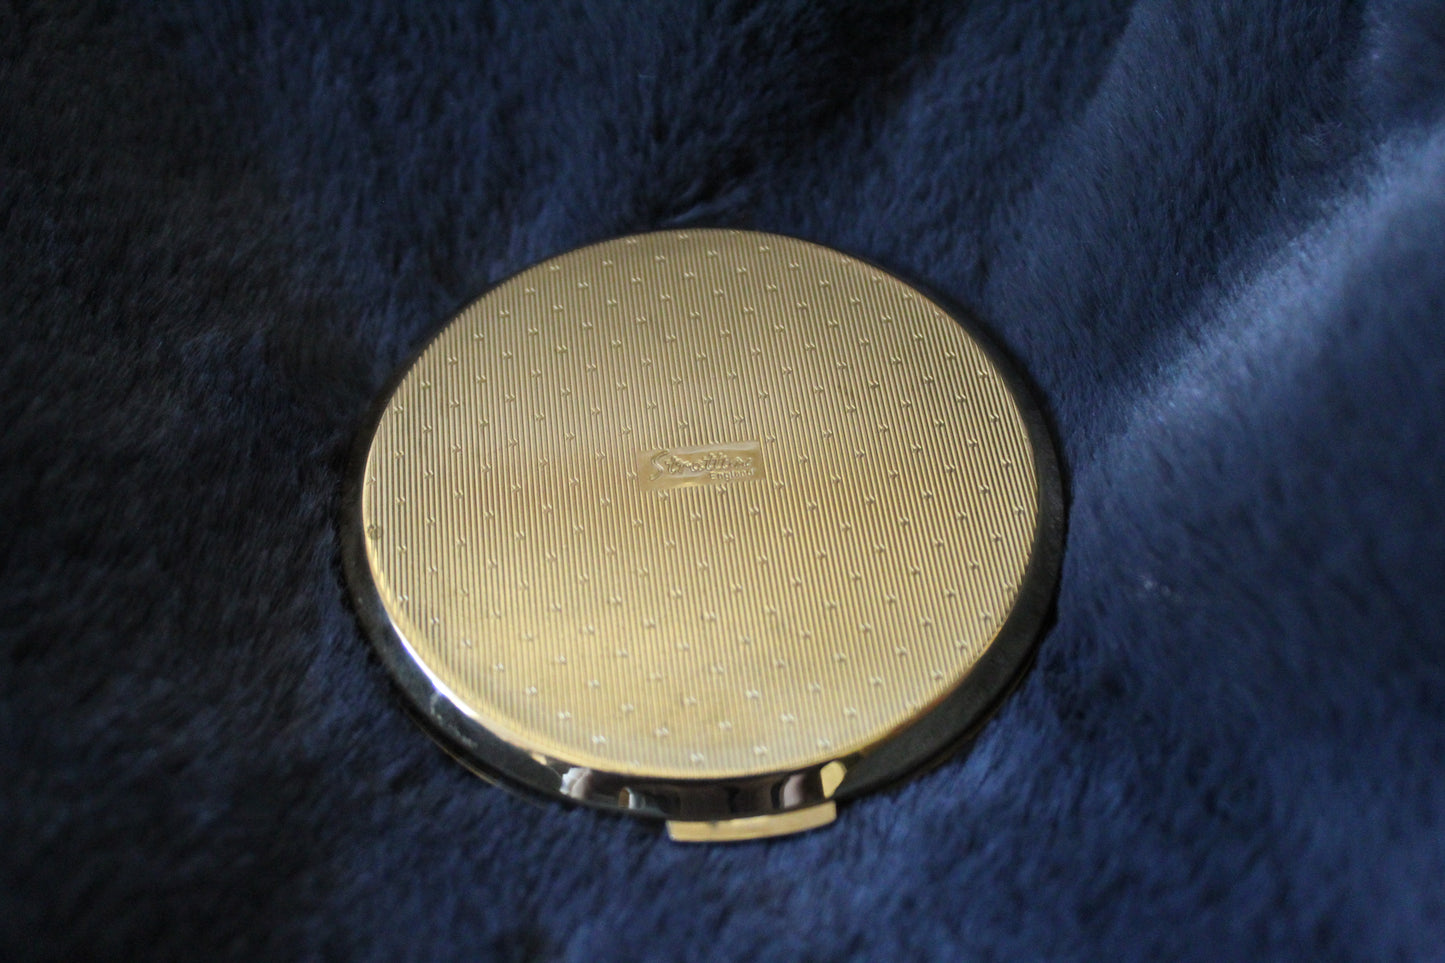 Vintage gold and cream compact with butterflies